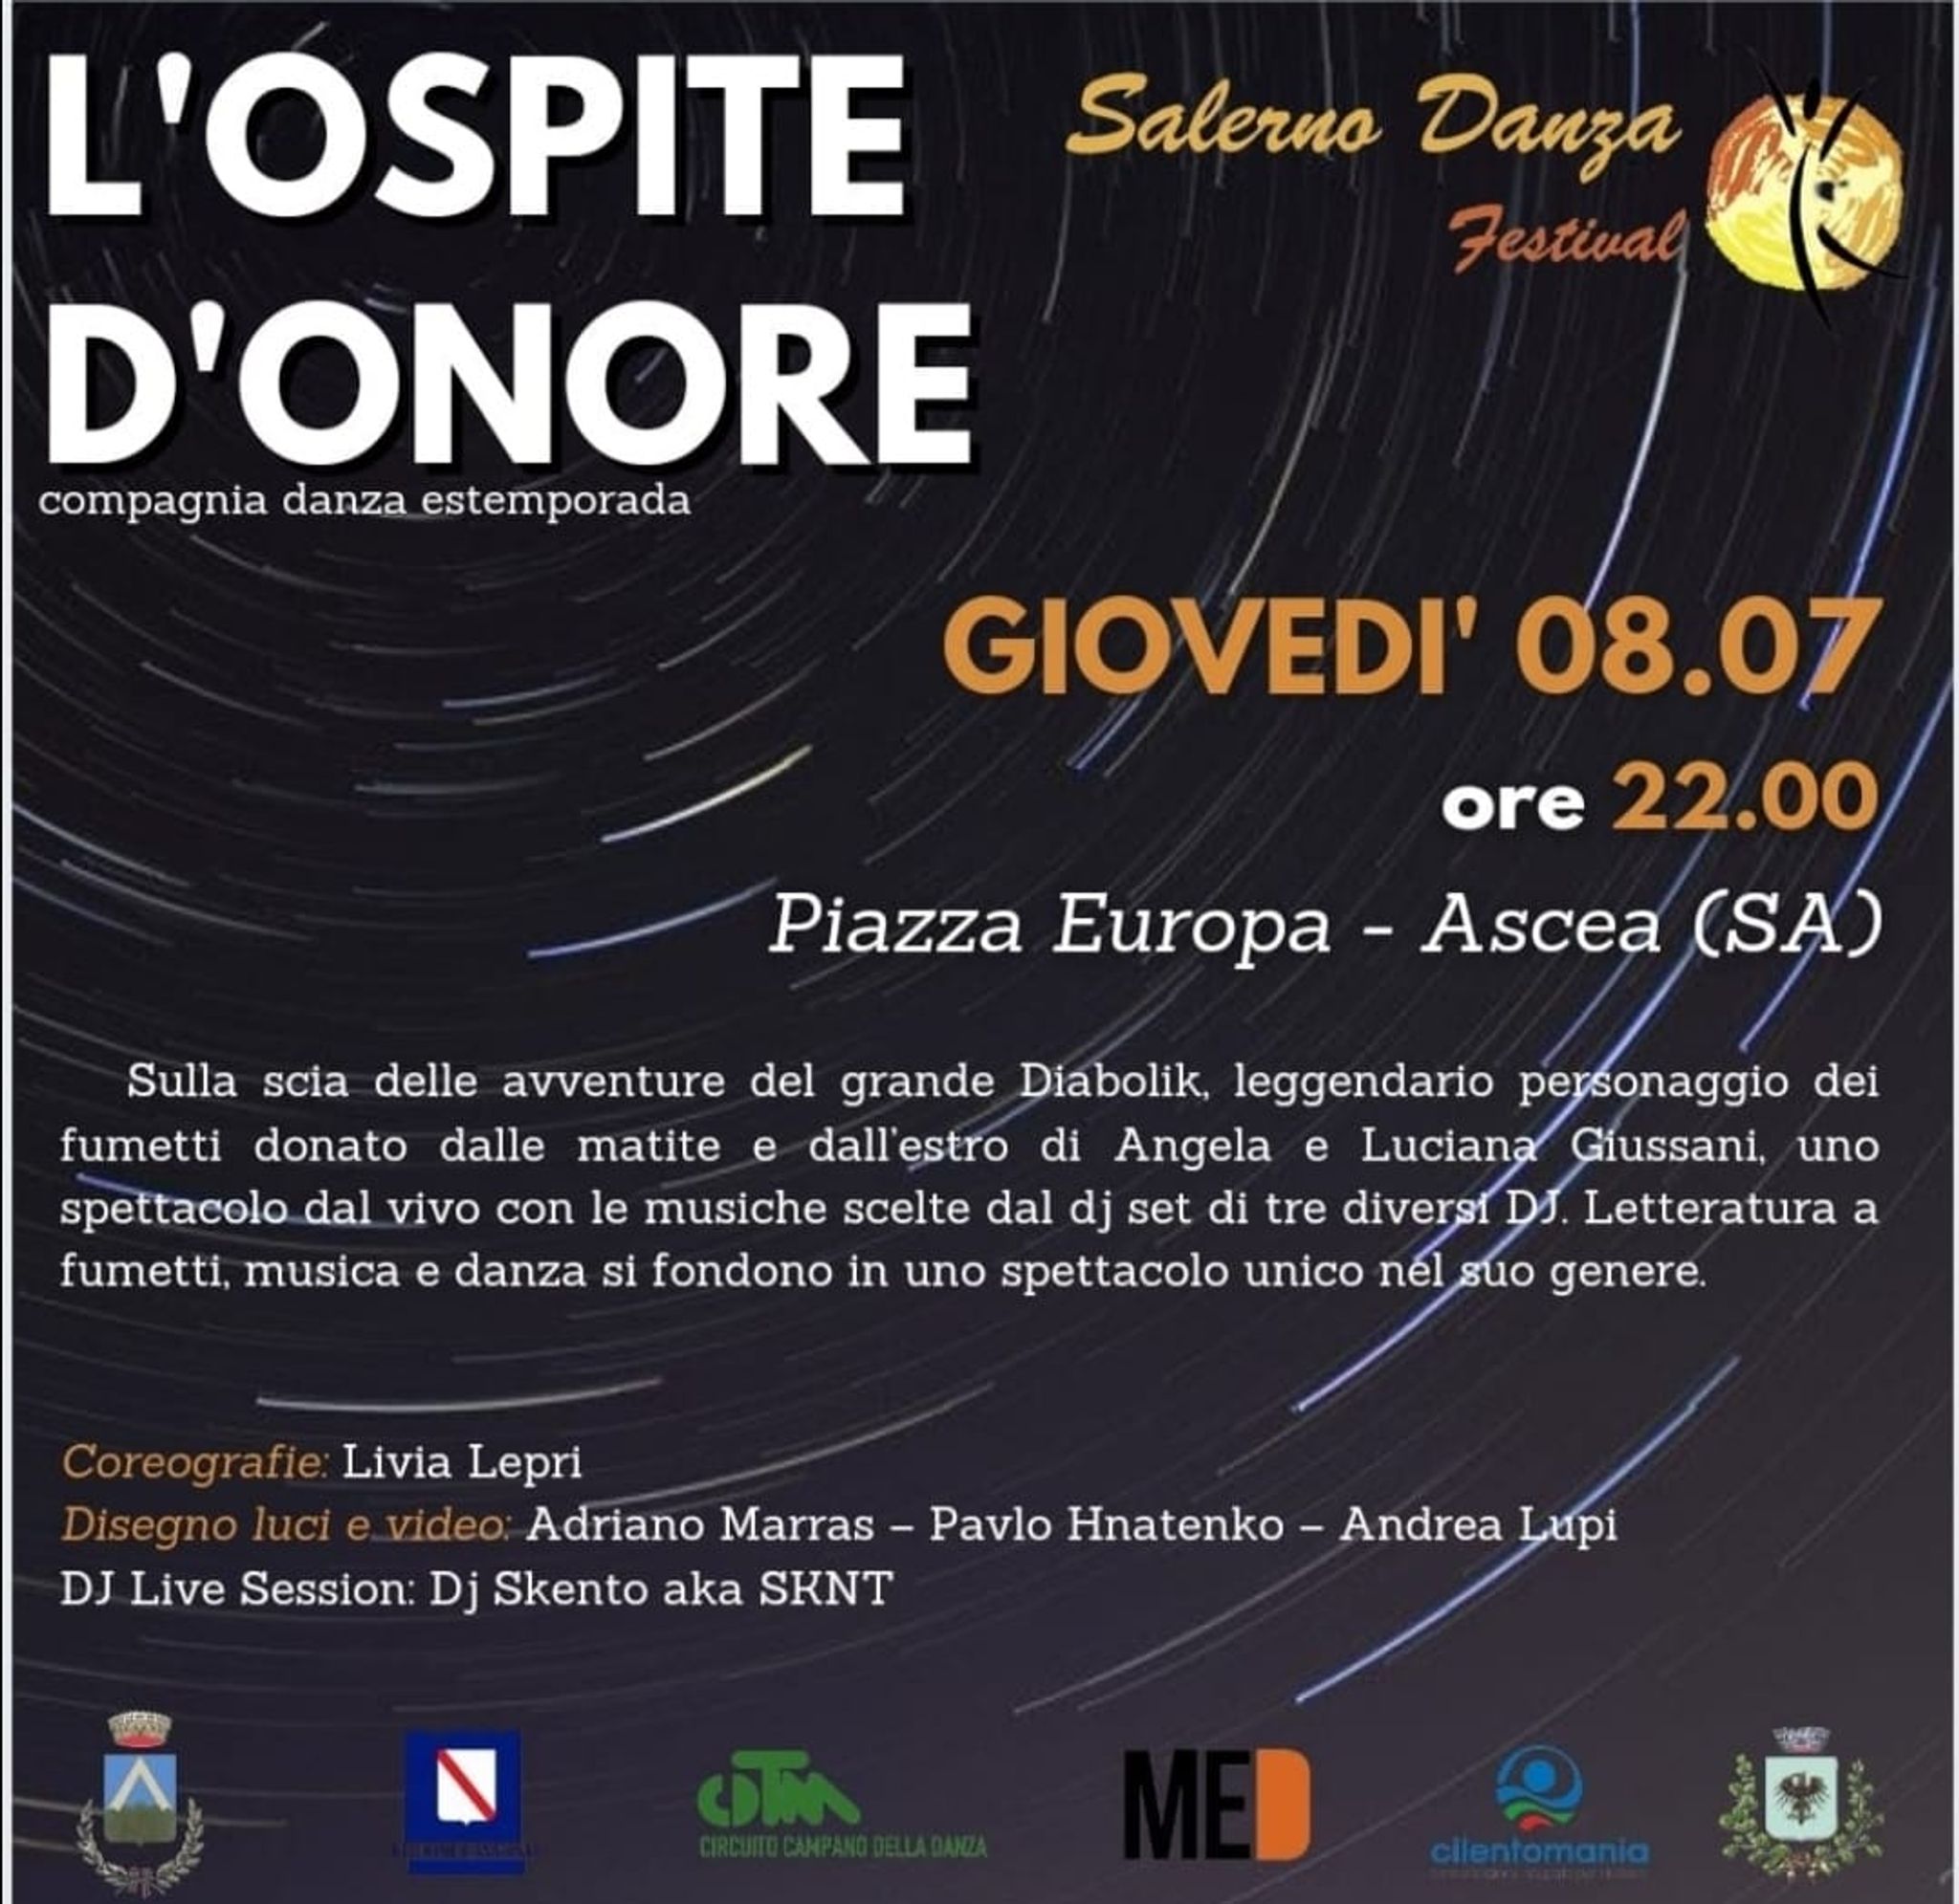 L'ospite d'onore